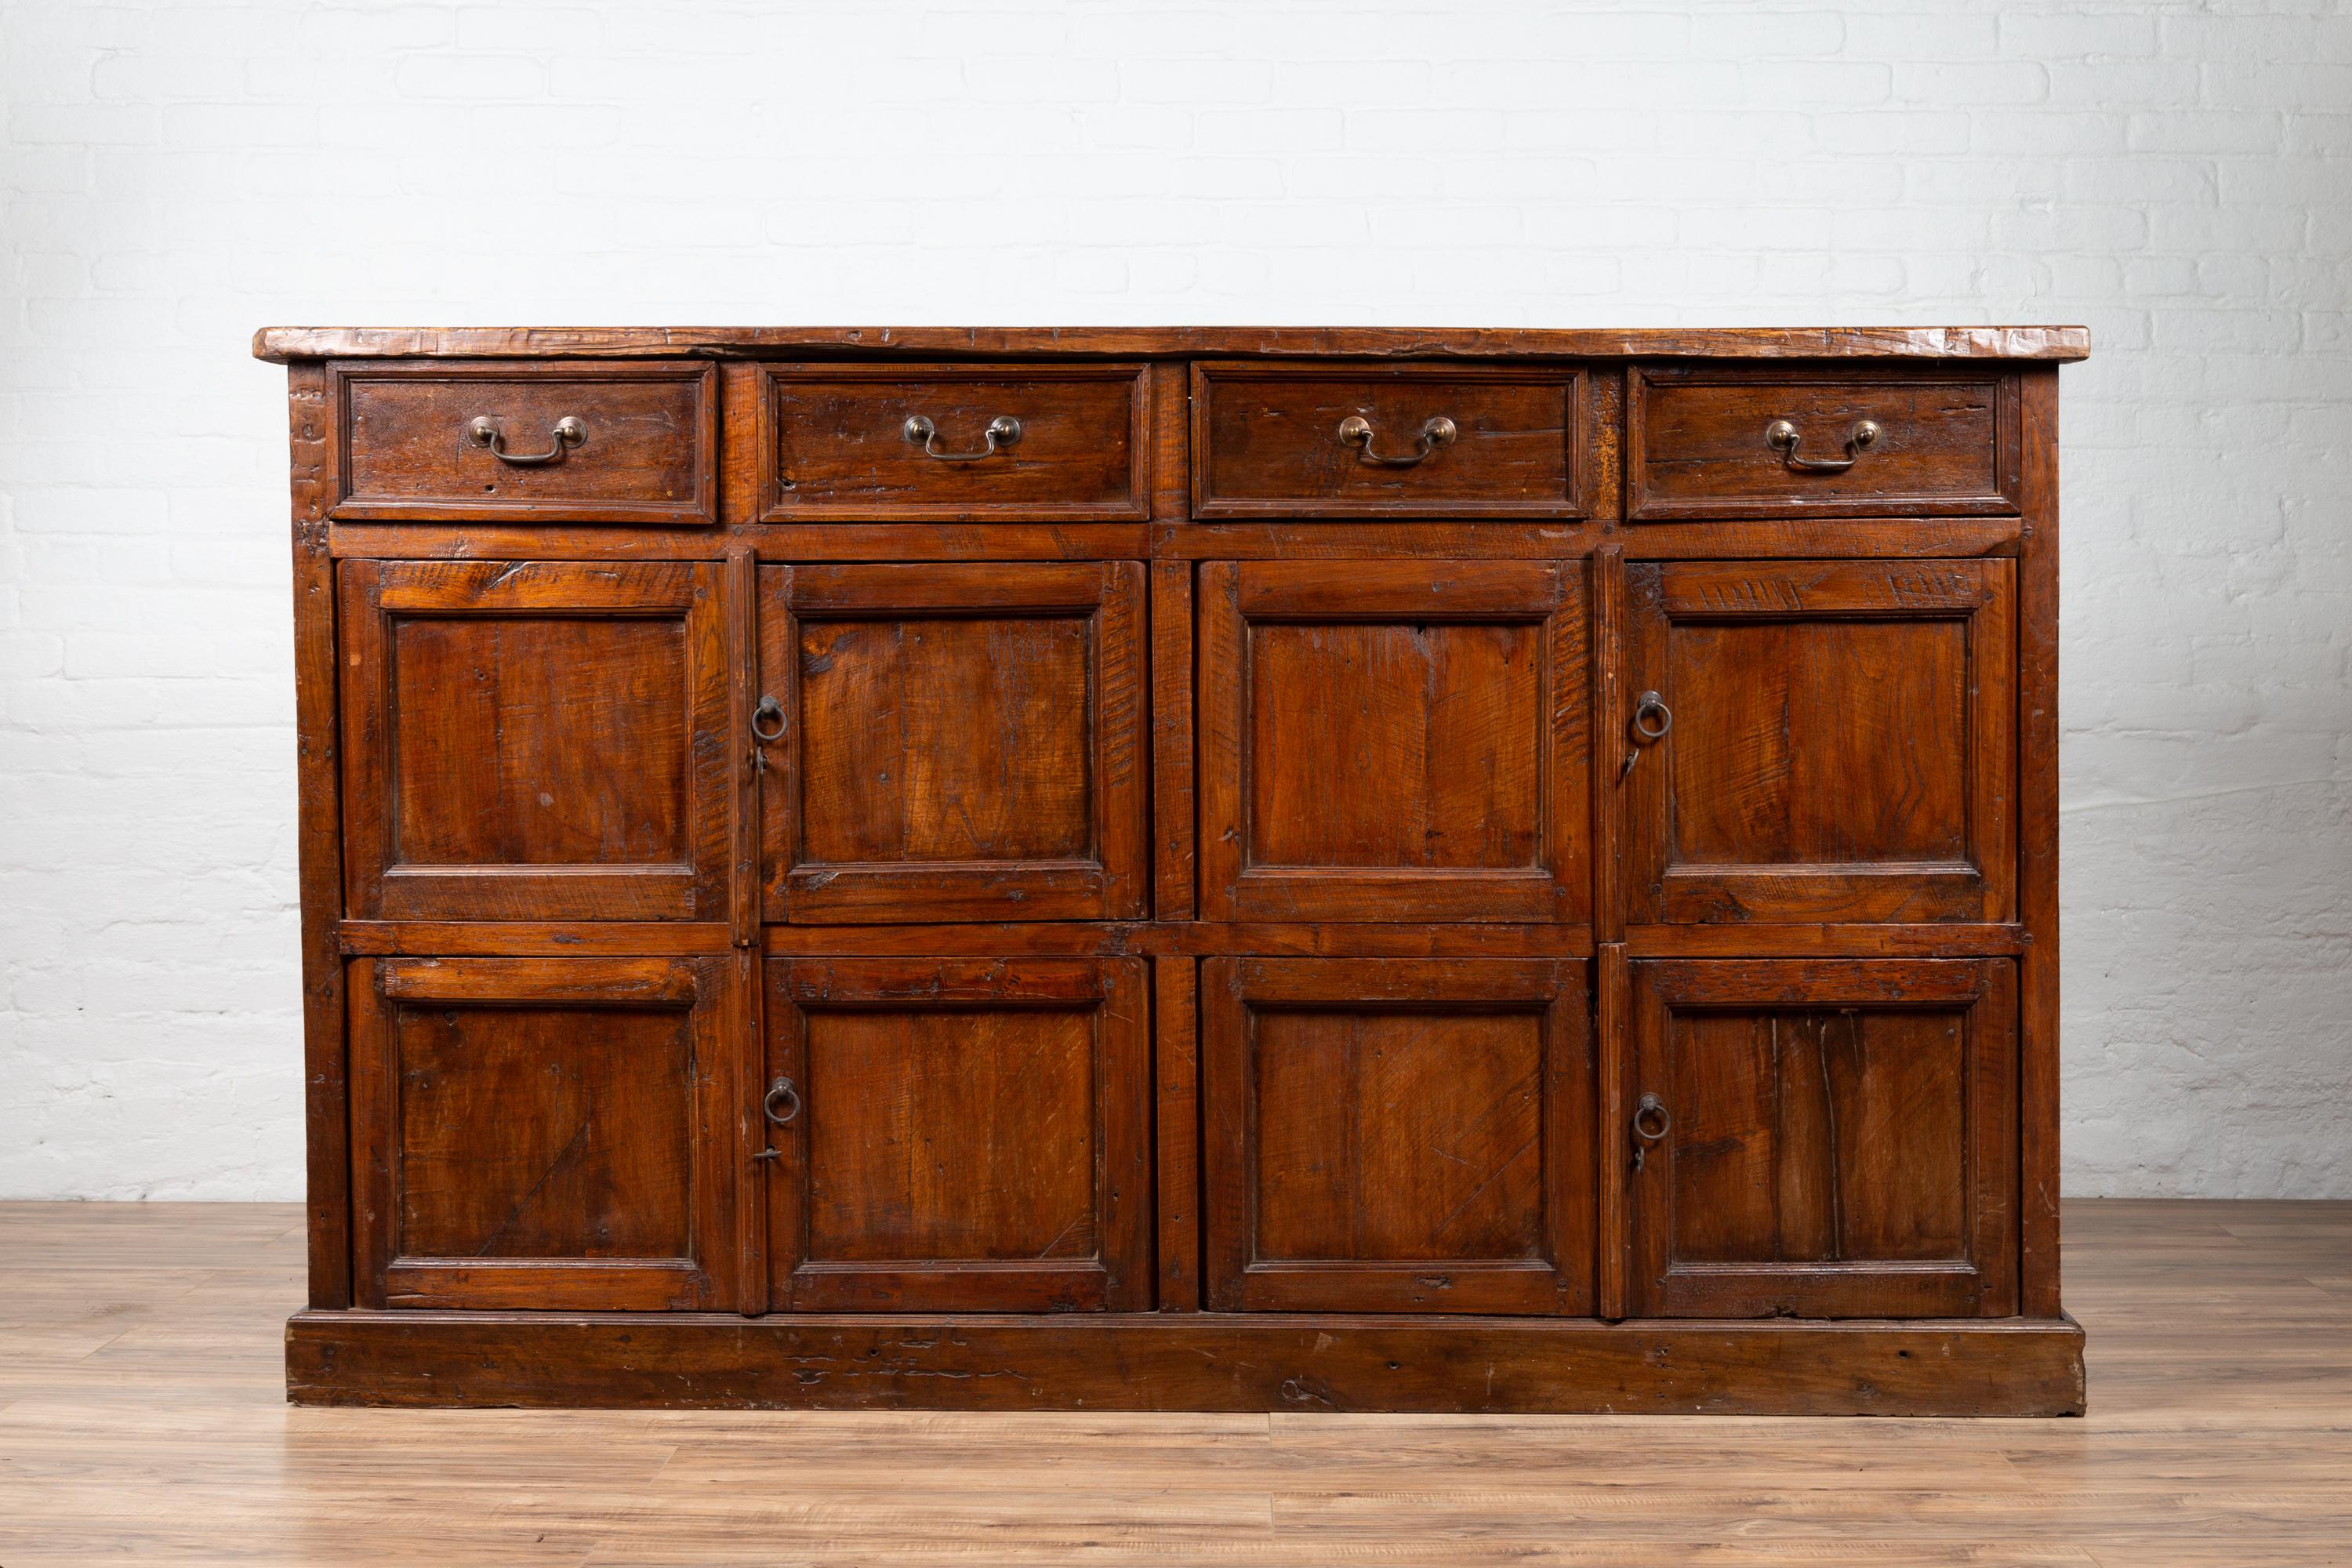 A large Javanese teak cabinet from the early 20th century, with four drawers, and four sets of double doors. Born on the island of Java in the early years of the 20th century, this robust teak cabinet features a rectangular top sitting above four